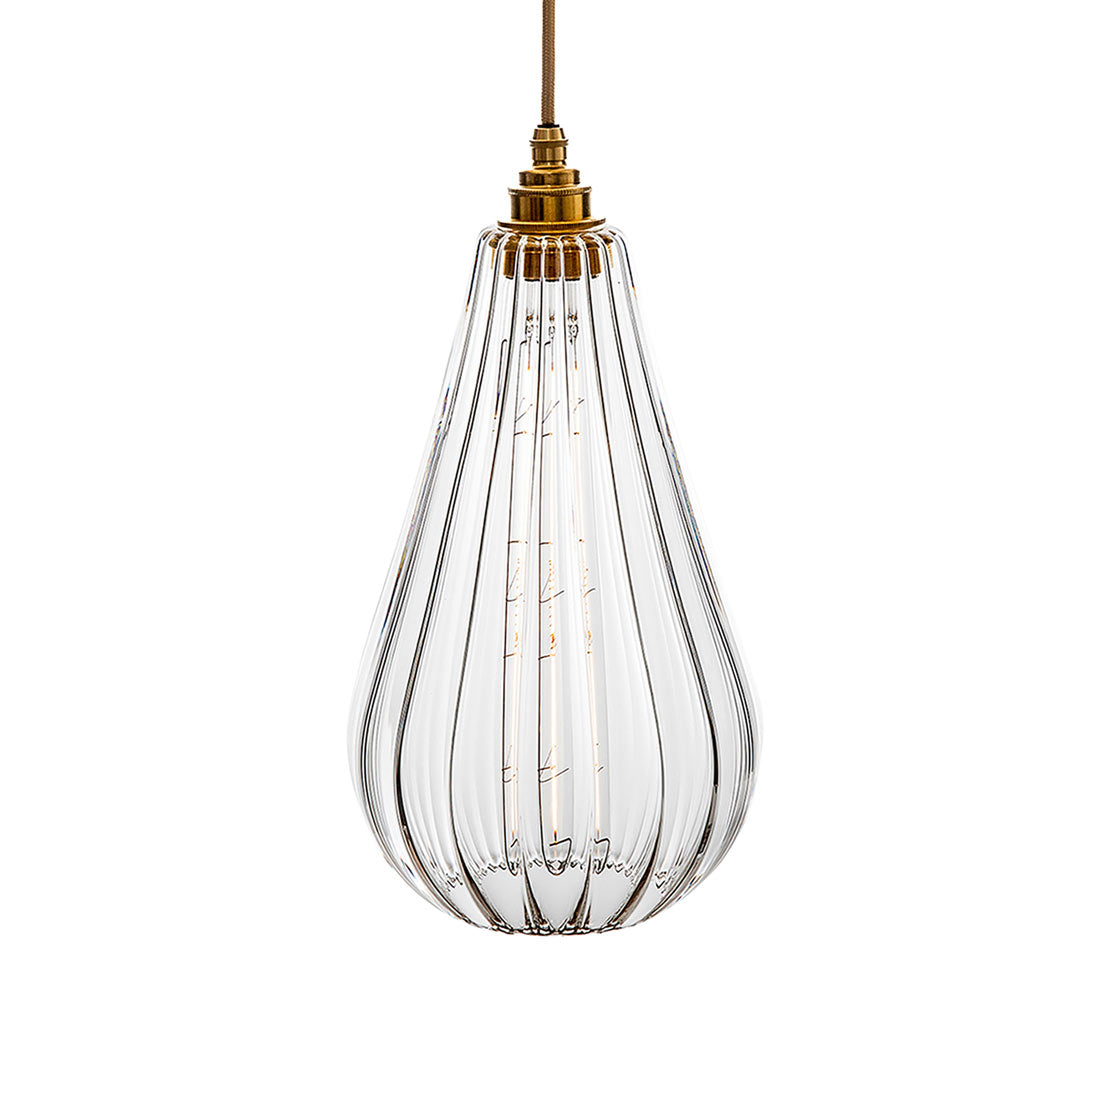 Kingston glass pendant light with a ribbed glass style from South Charlotte Fine Lighting